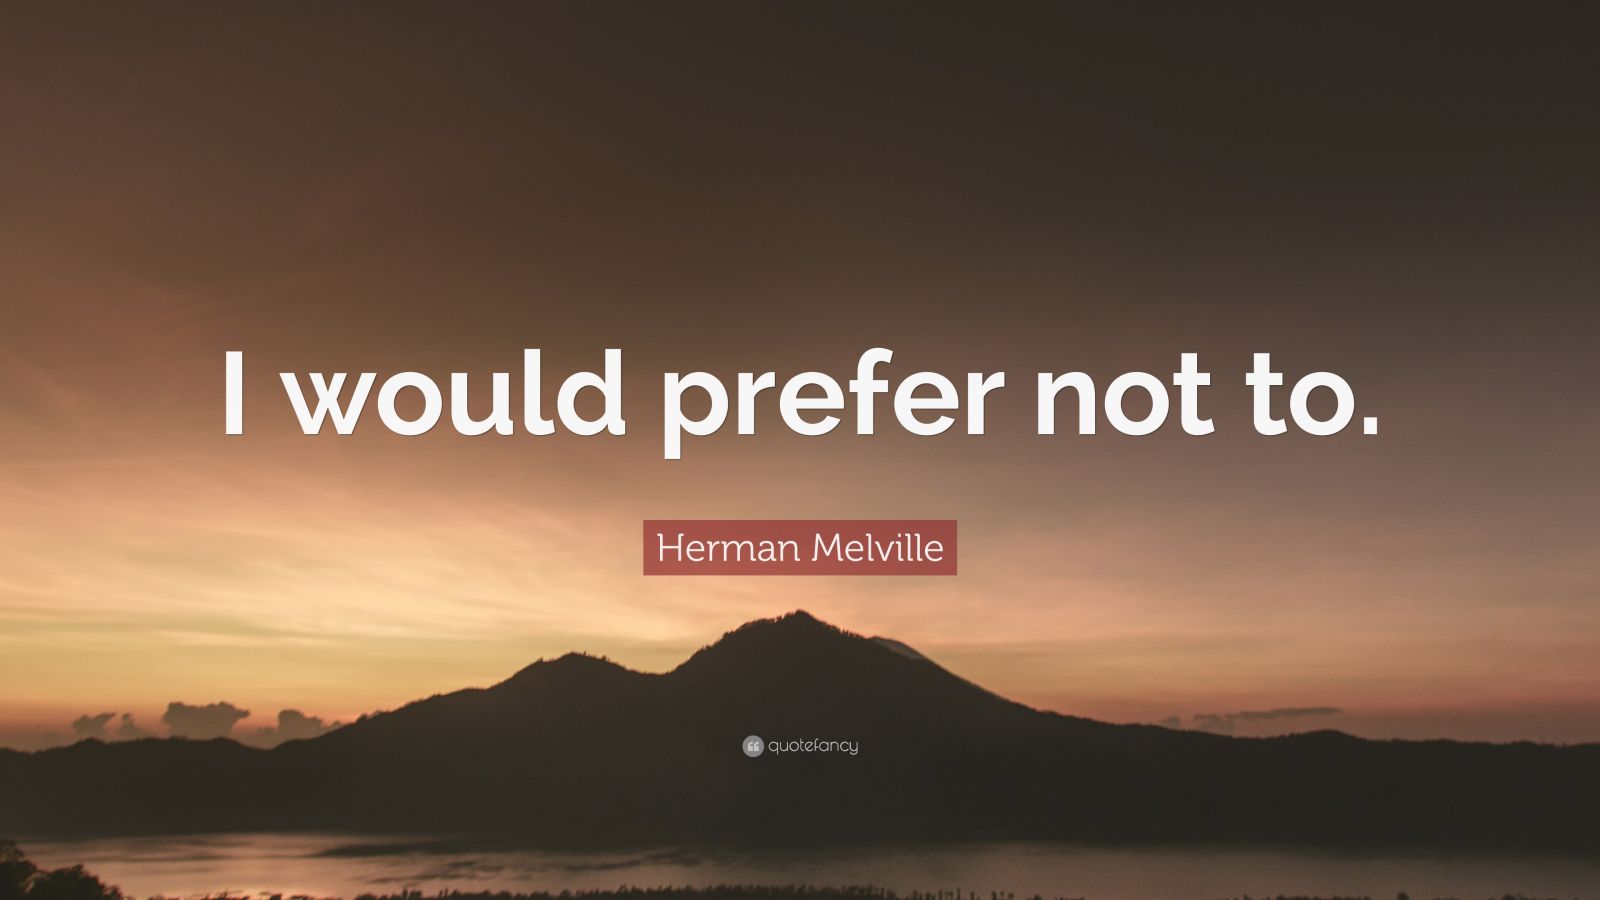 Herman Melville Quote: “I would prefer not to.” (12 wallpapers ...